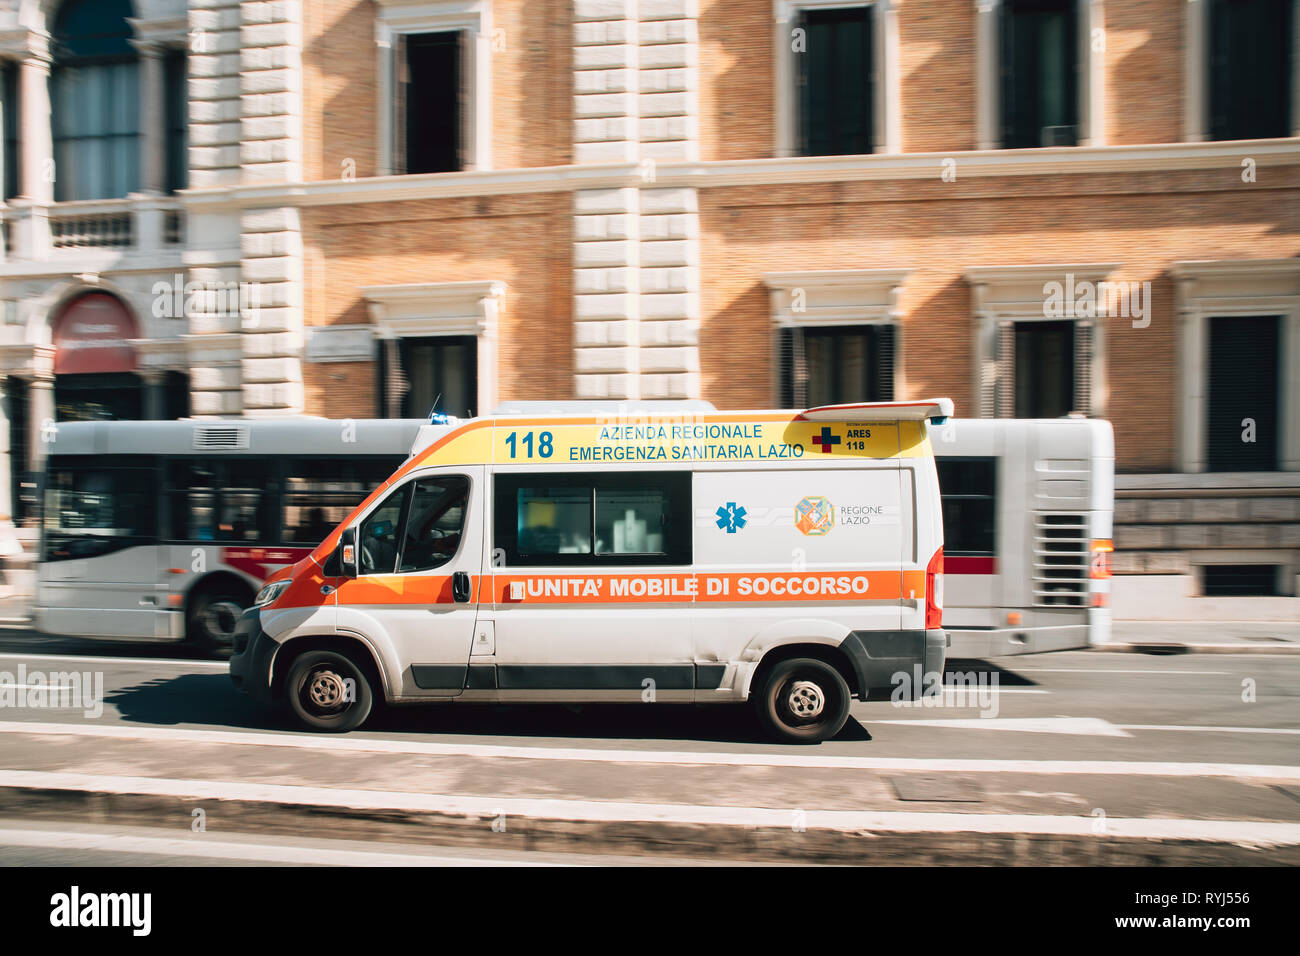 Rome, Italy - October 20, 2018: Moving With Siren Emergency Ambulance Reanimation Van Car On Street. Emergency Lights System Els Activated Stock Photo